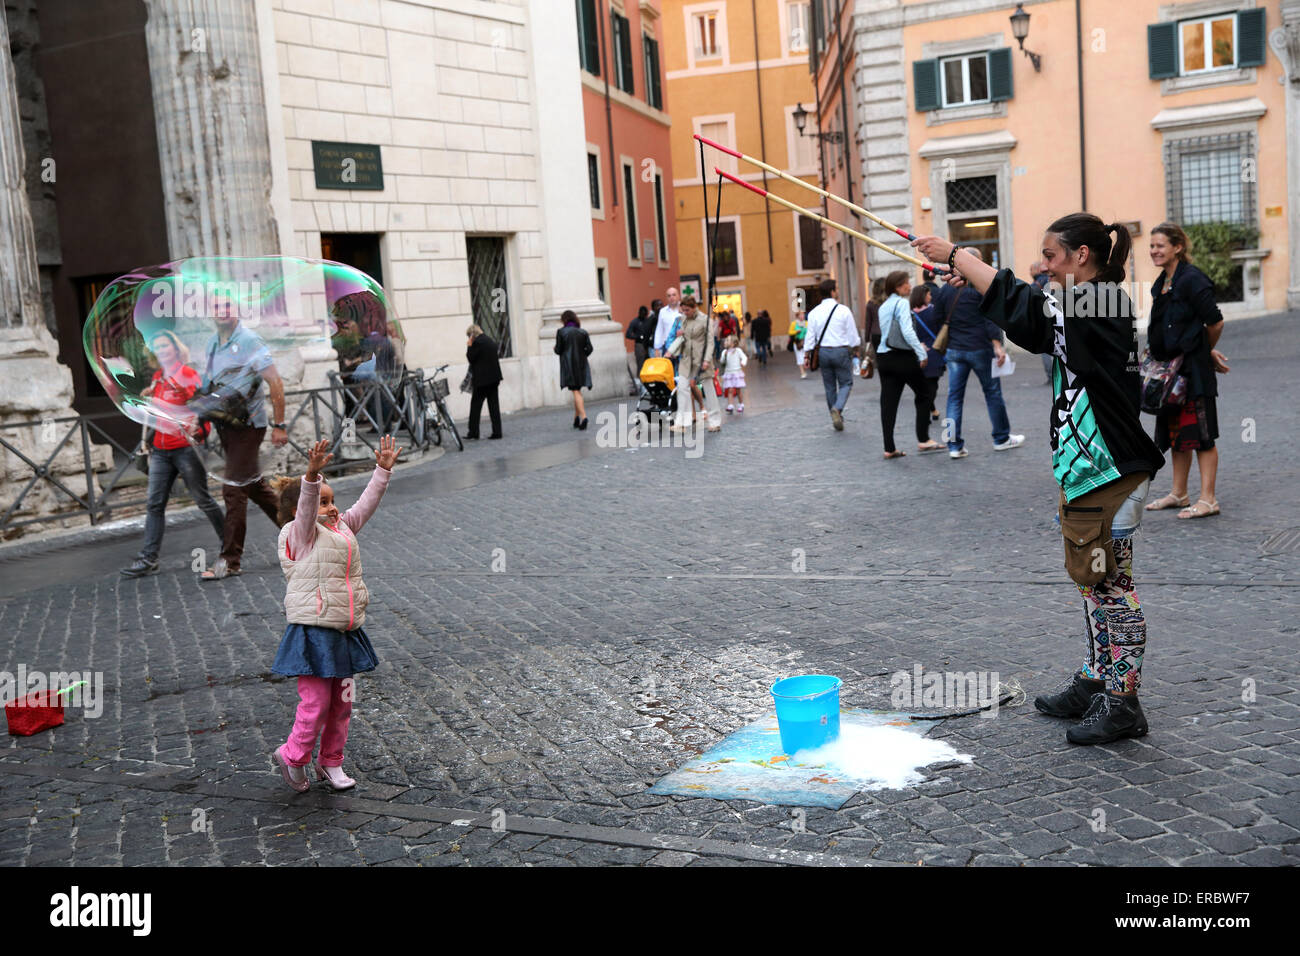 Woman creating large bubbles to the delight of children in Rome Italy Stock Photo